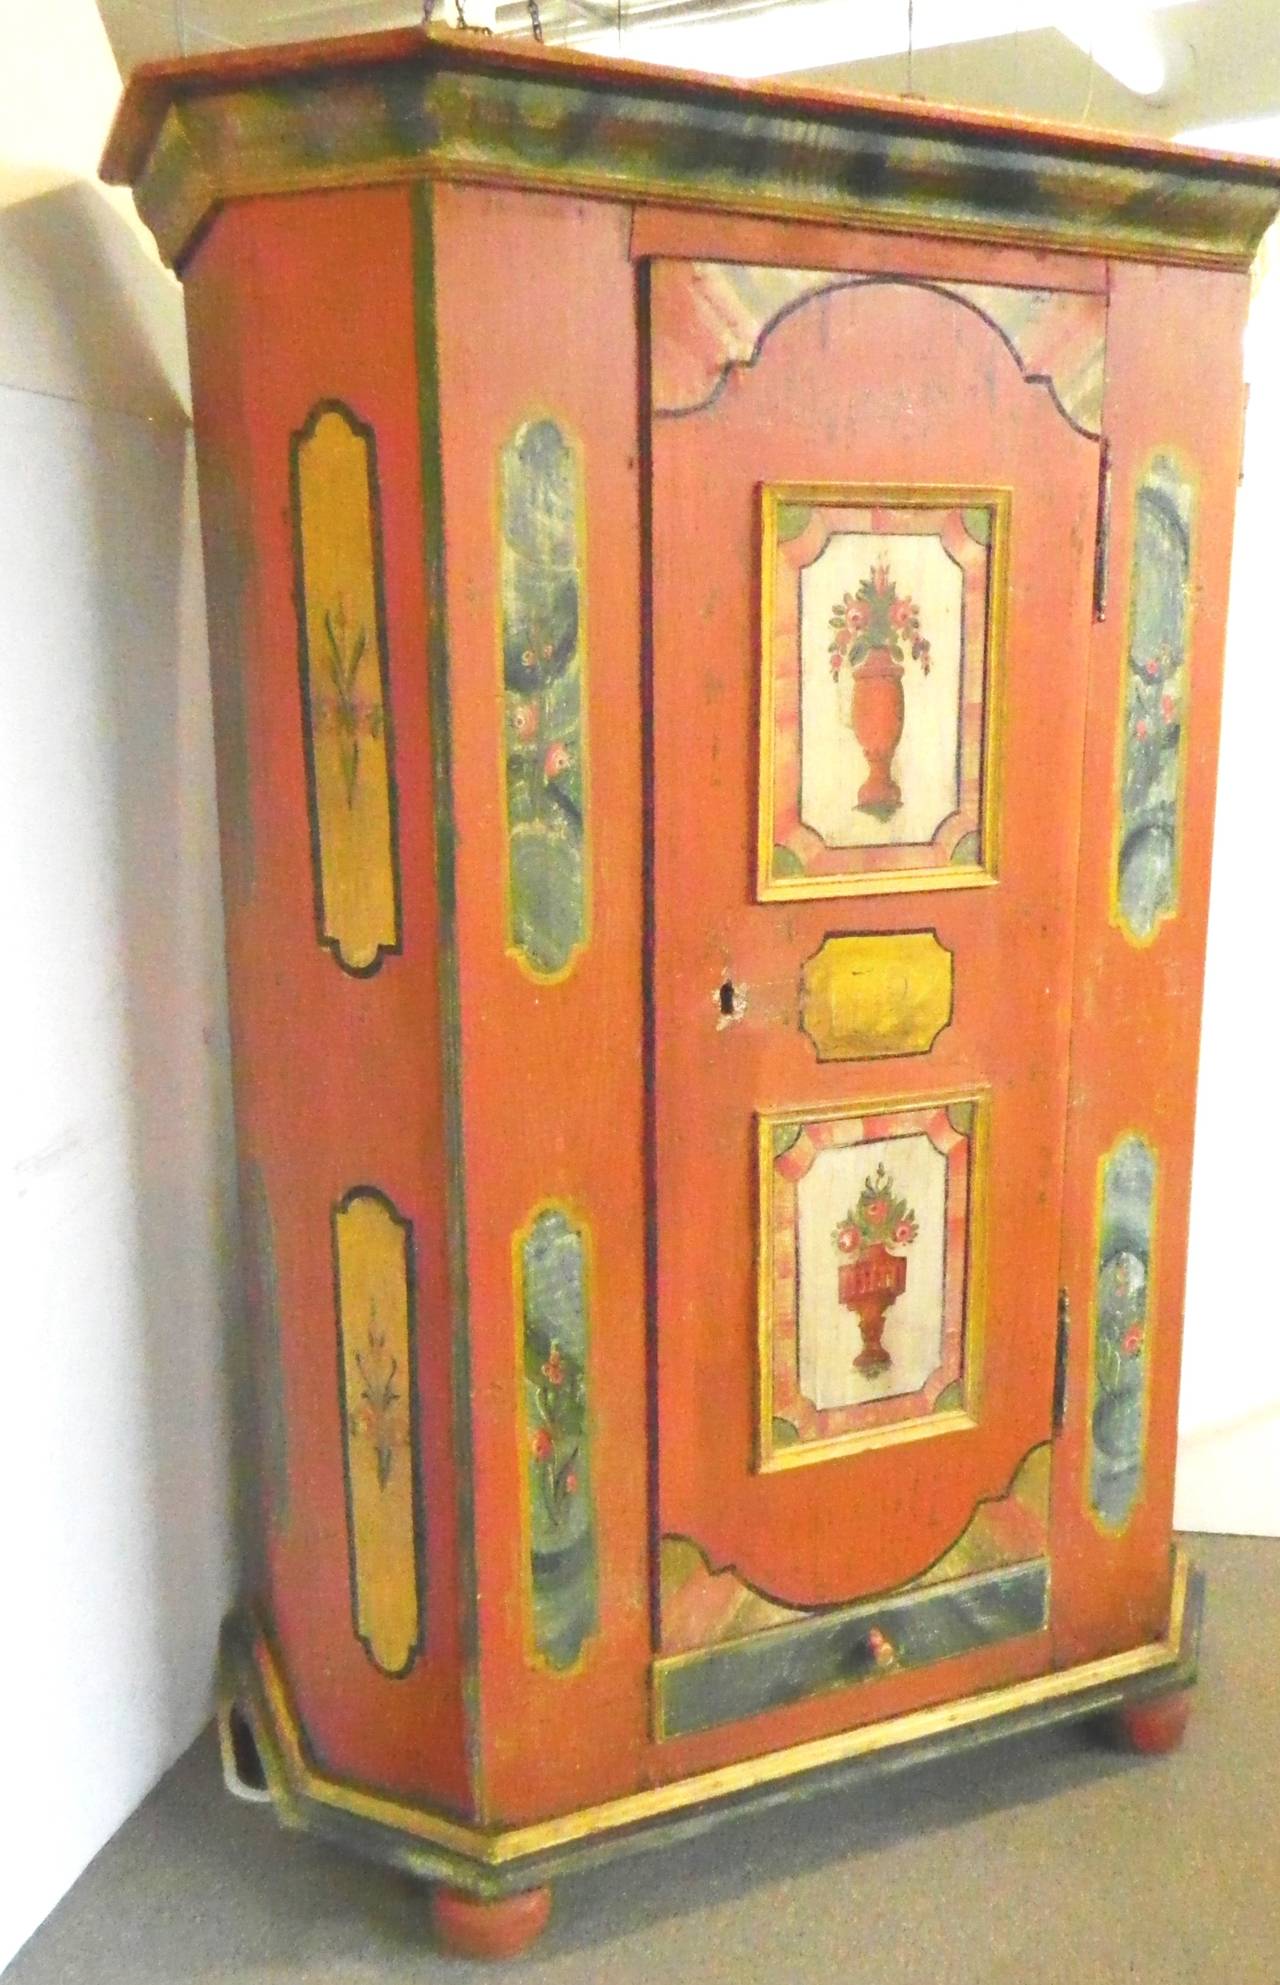 Charming peach color painted wardrobe with pots of flower panels on the door on bun feet. Between the flower panels is a date of 1720. There is an antique hand made key for the cabinet lock. The one cabinet door opens to a large space with two rows